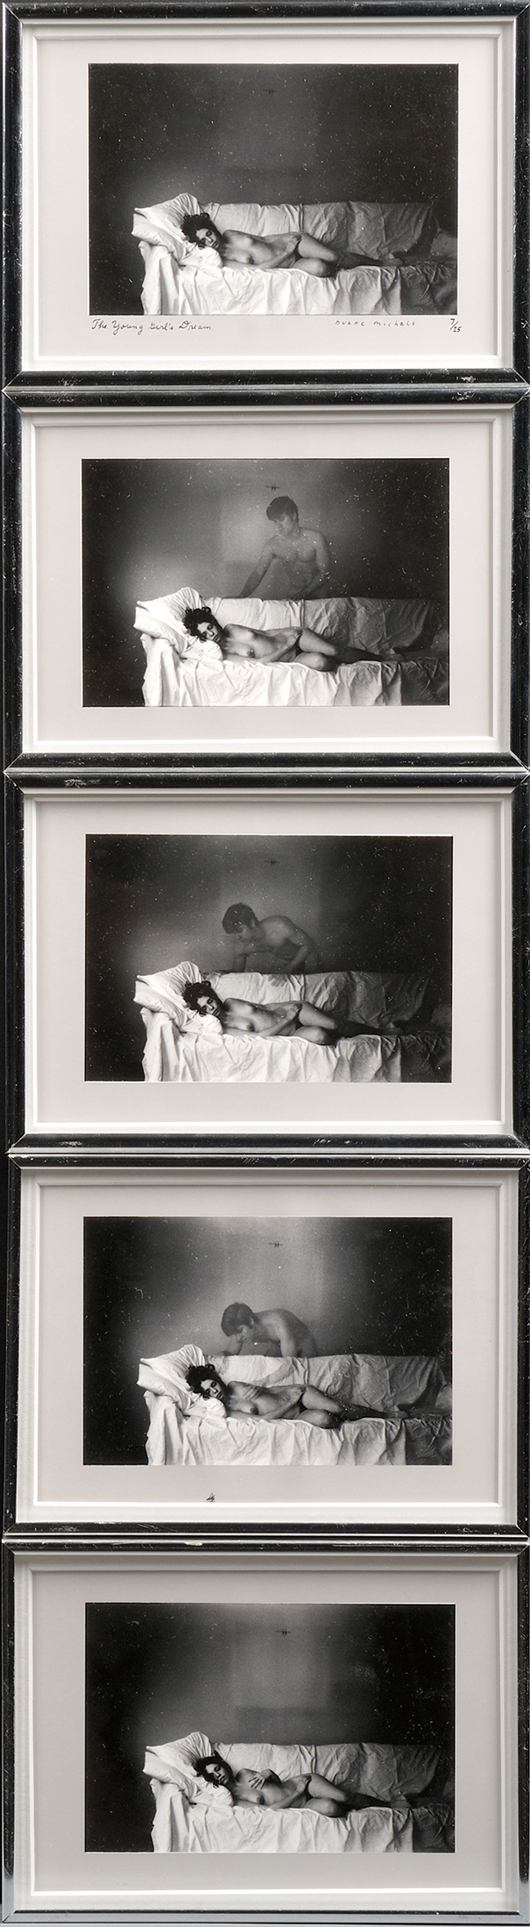 Duane Michals (American, b. 1932), ‘The Young Girl's Dream (in Five Parts),’ 1969, edition of 25. The first titled, signed, and numbered. Gelatin silver prints, image sizes 3 3/8 x 5 inches, framed. Realized: $5,925. Skinner Inc. image.